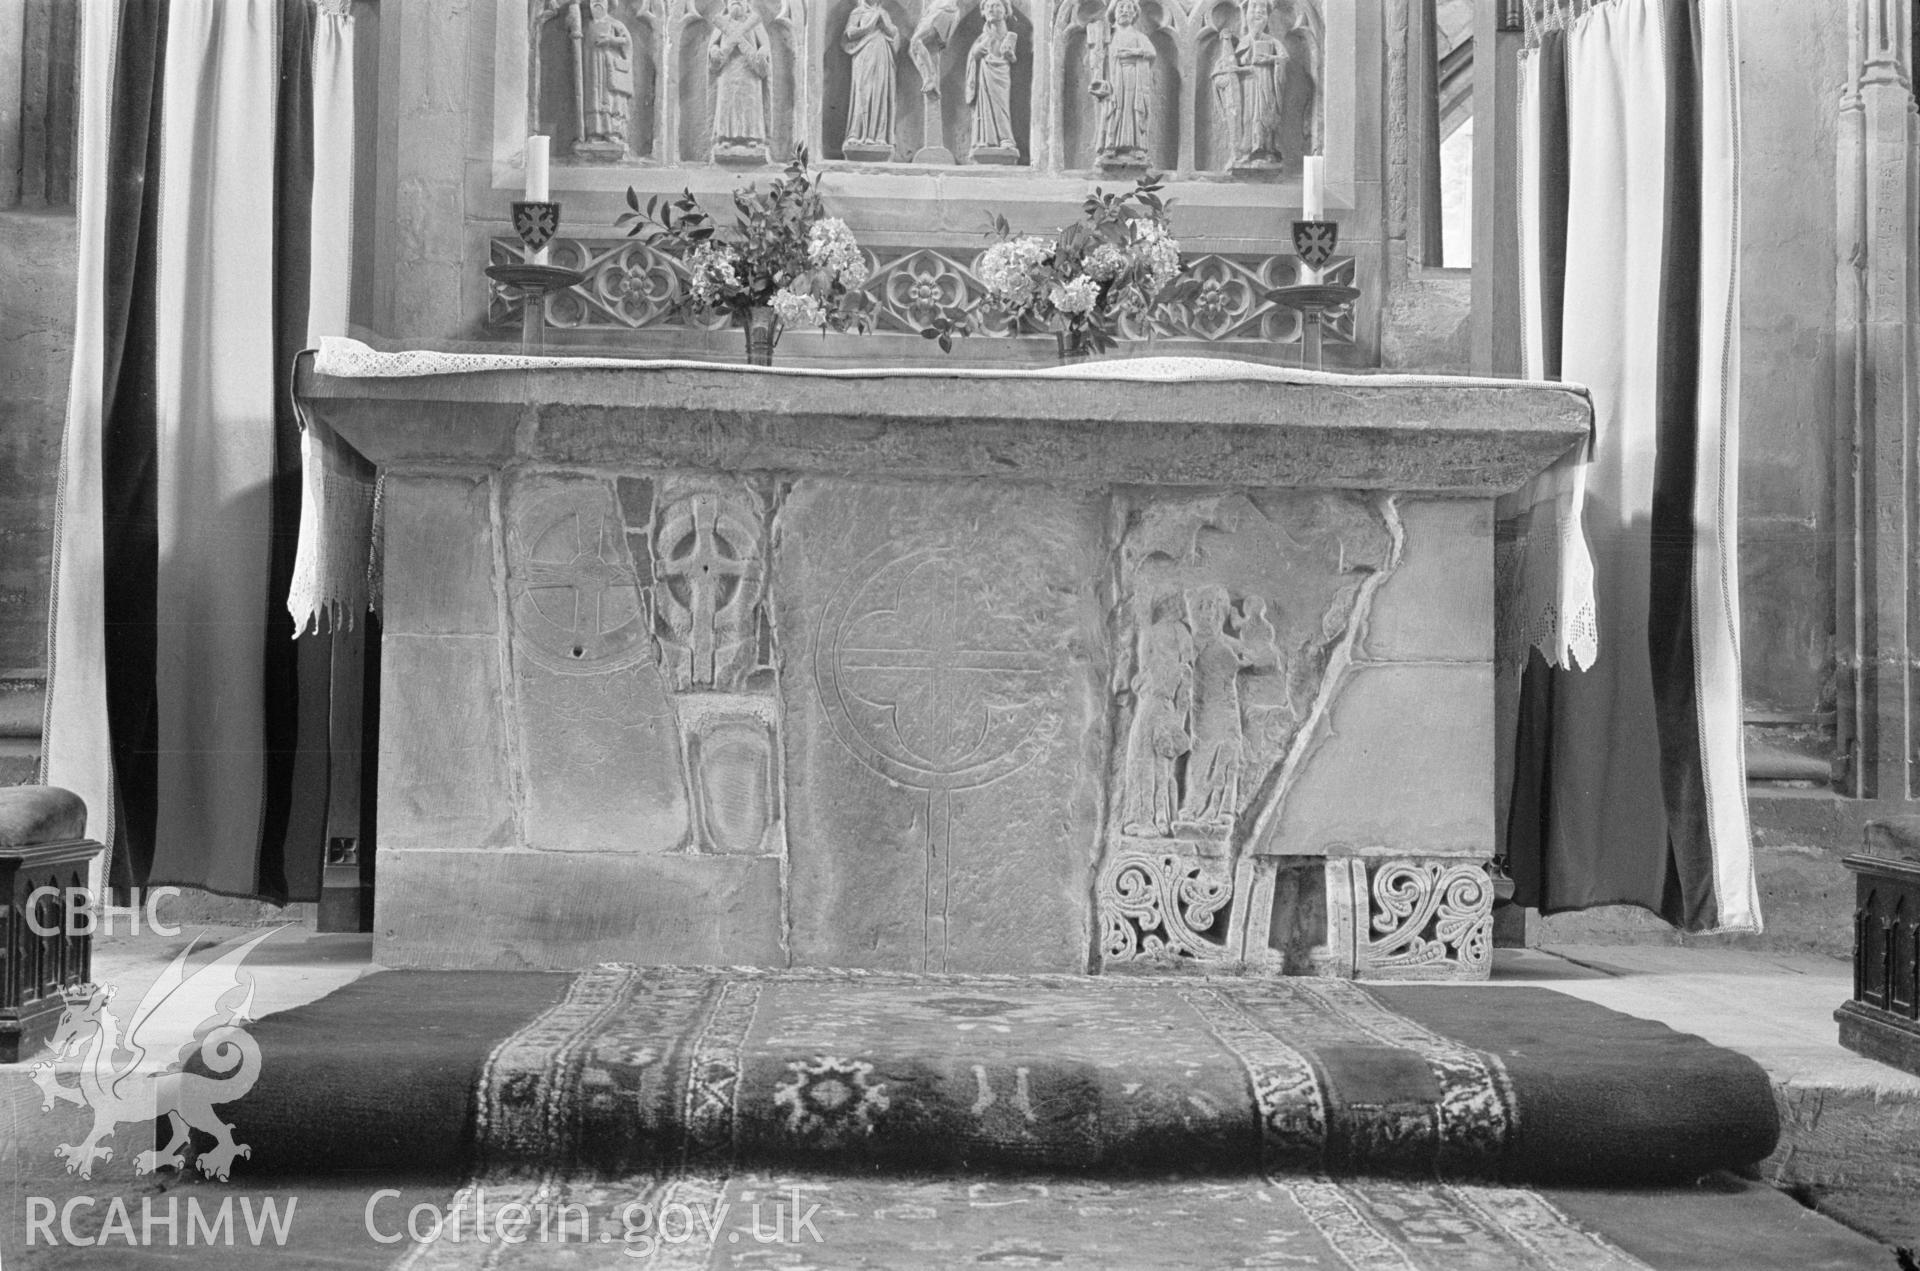 Black and white nitrate negative showing interior view of St David's Cathedral.